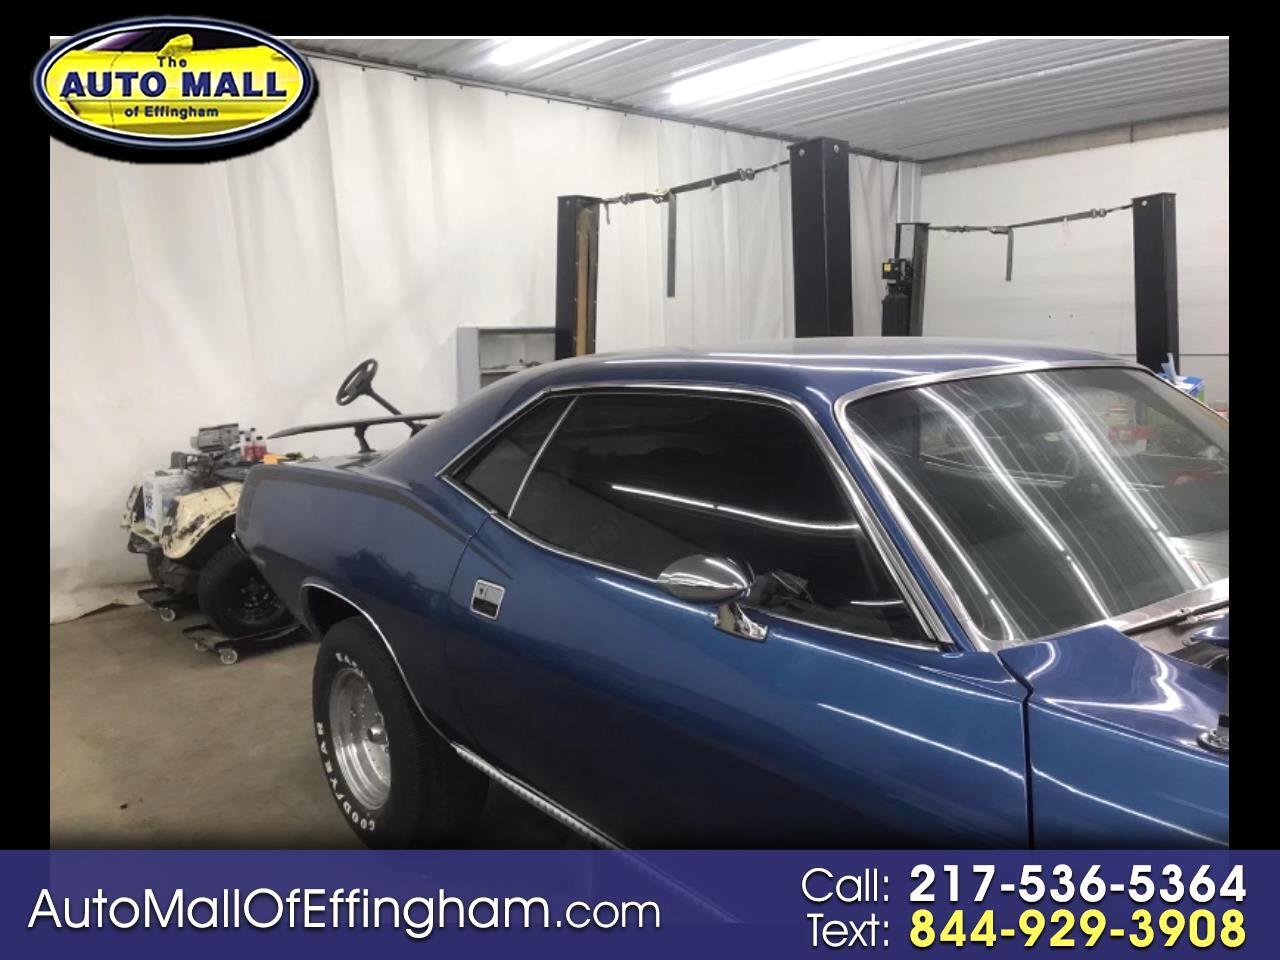 For Sale: 1970 Plymouth Cuda in Effingham, Illinois for sale in Effingham, IL